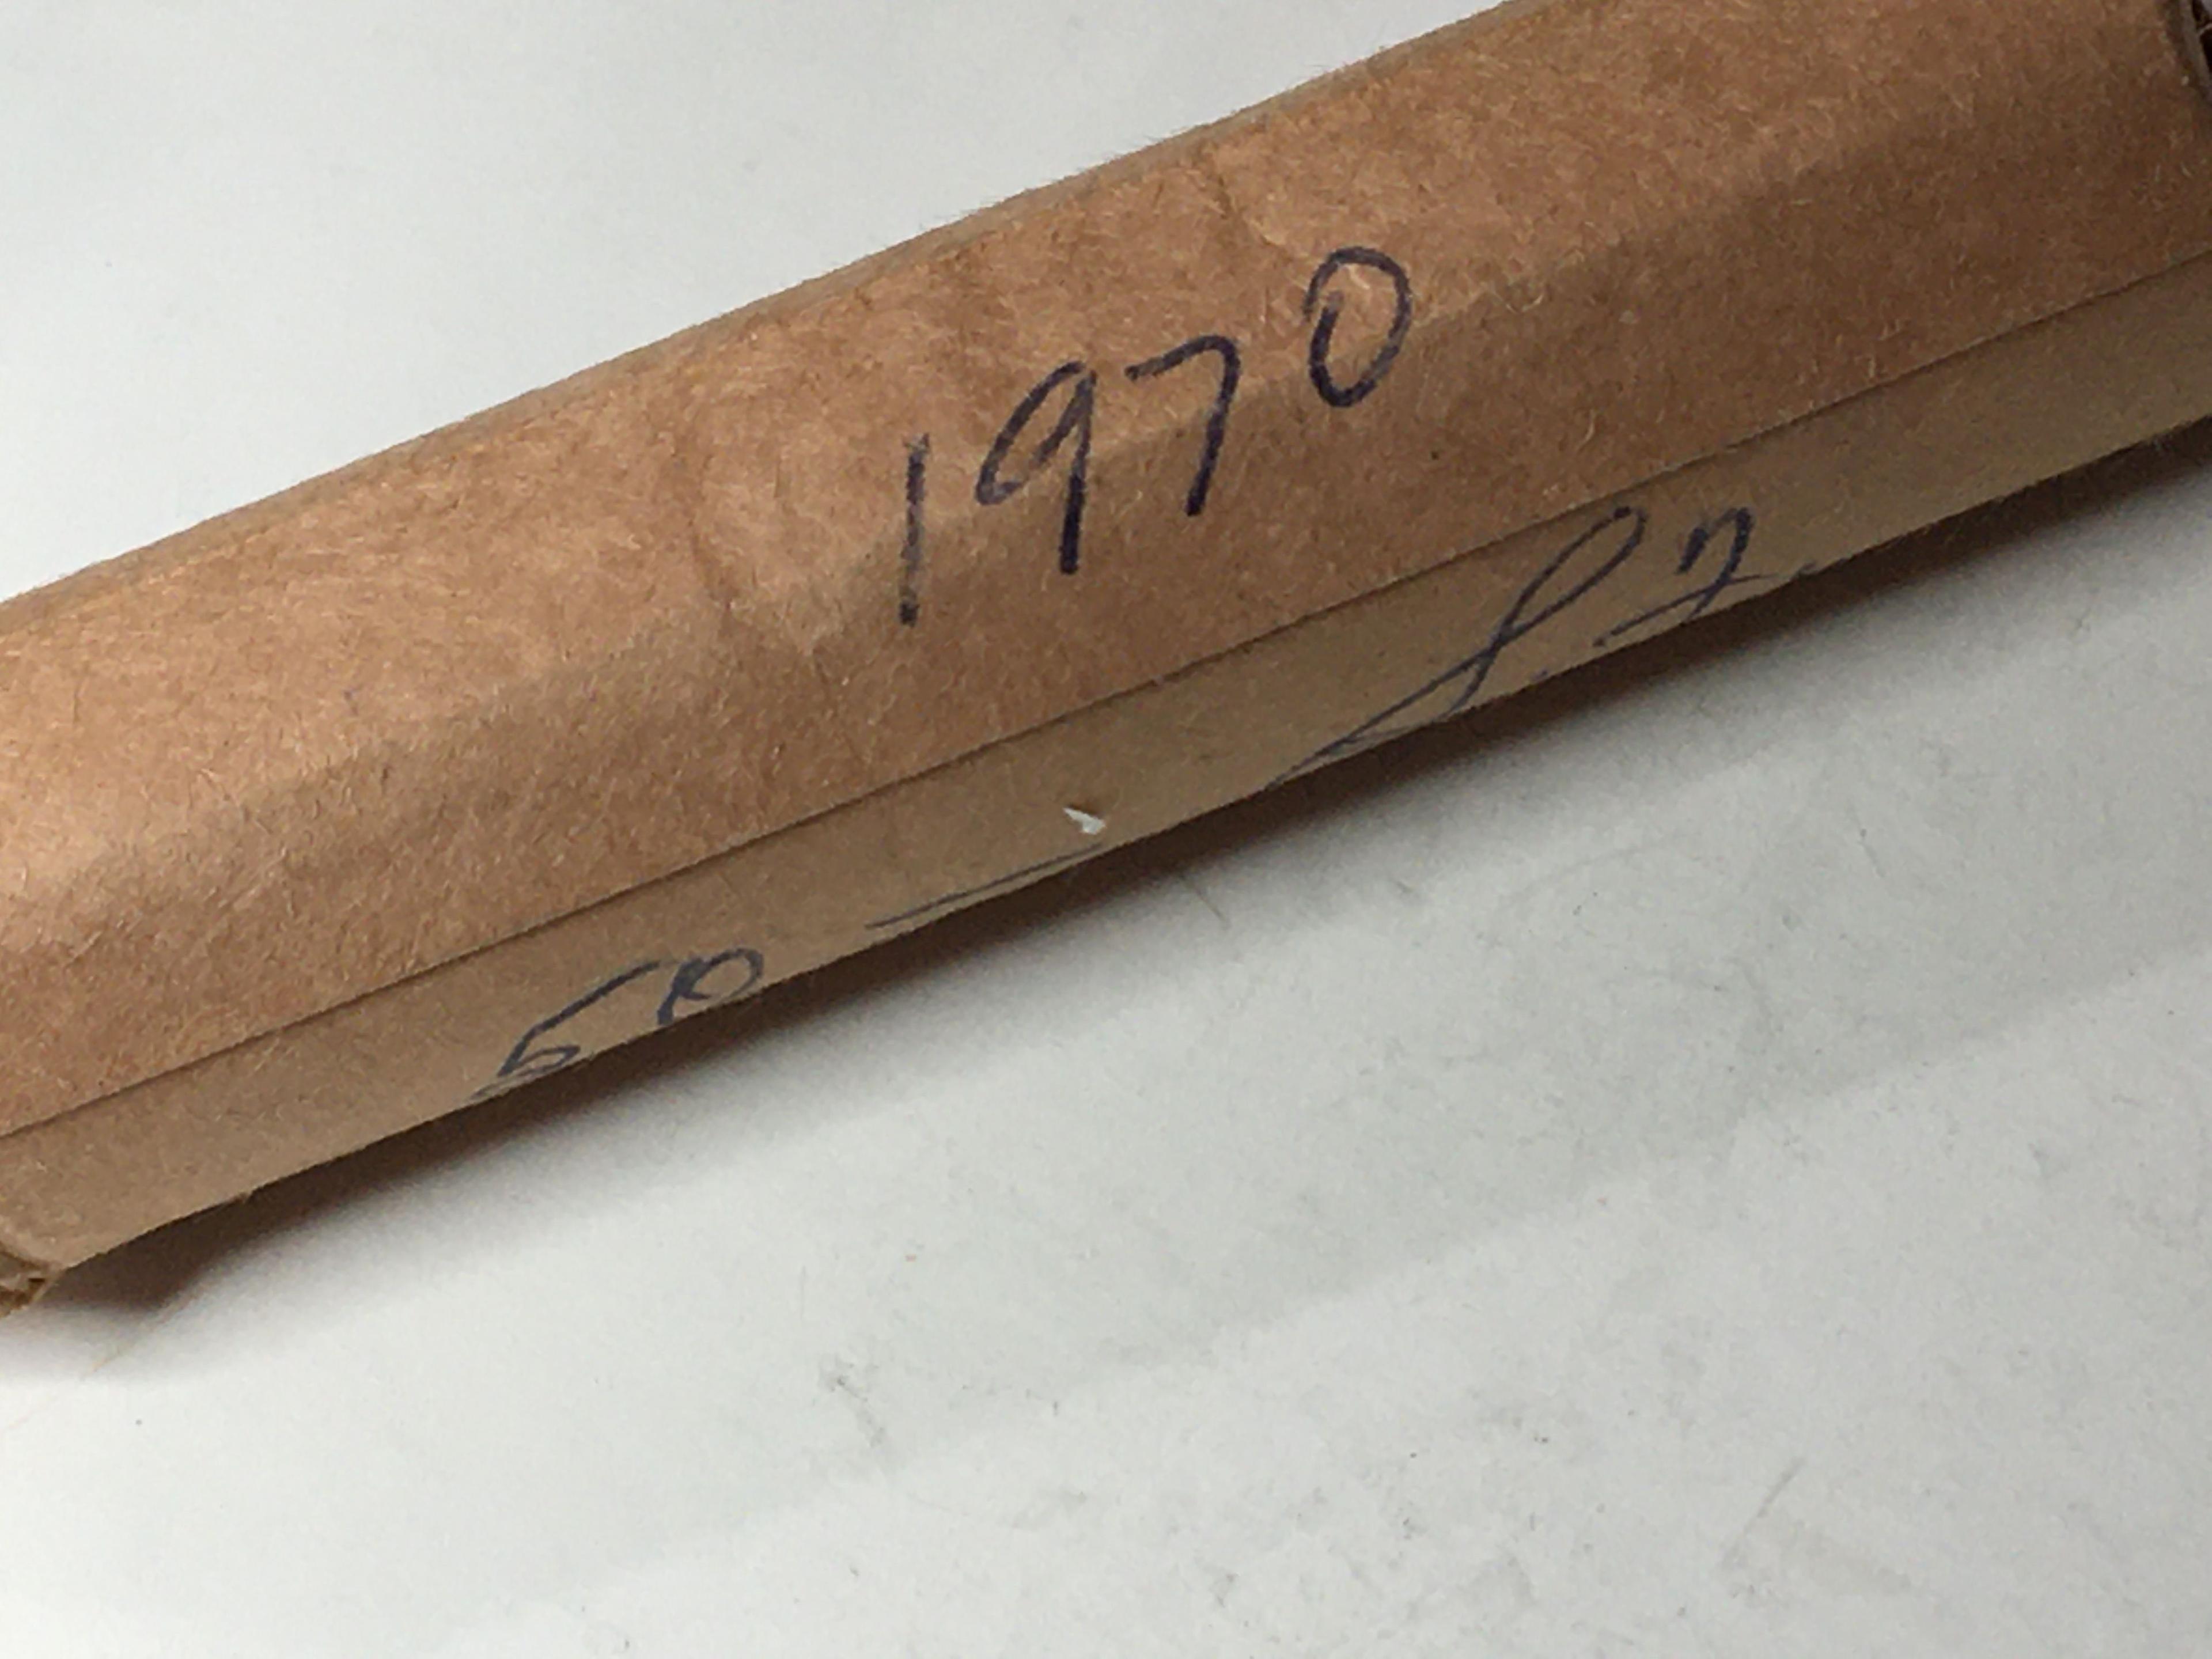 Roll Of 1970 Copper Pennies Errors?